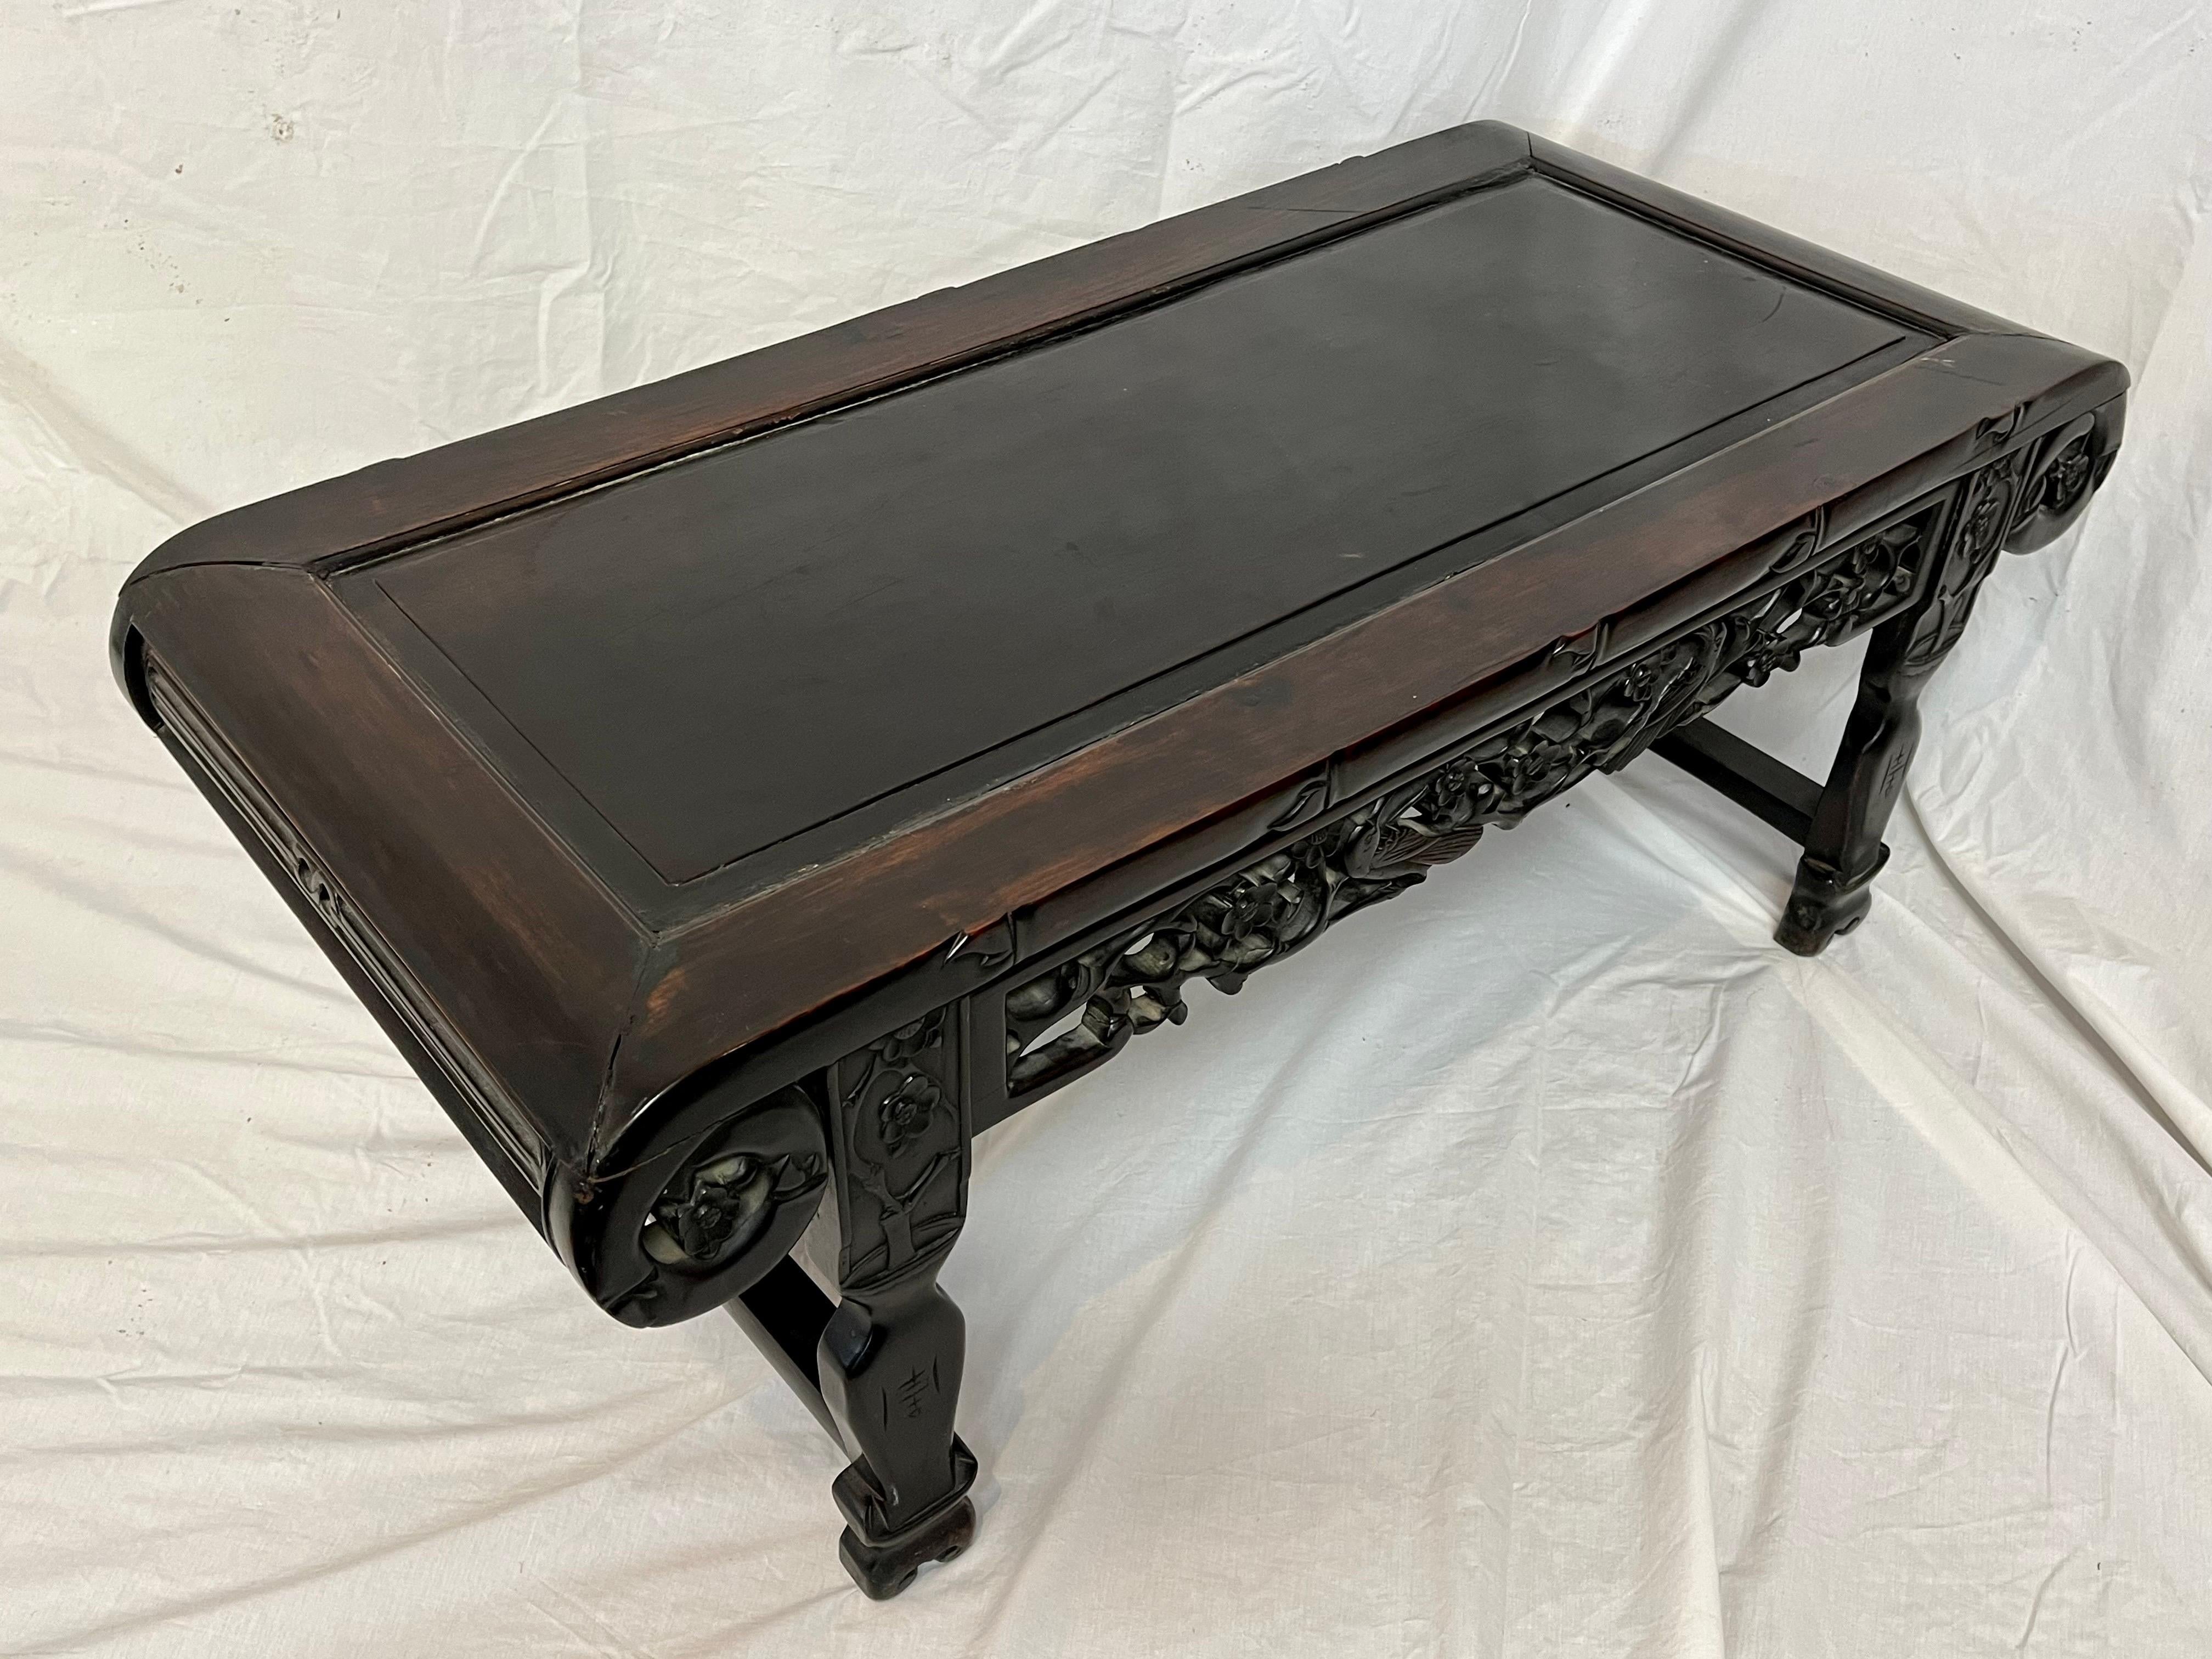 Asian Antique Carved and Pierced Fretwork Rounded Corners Low or Coffee Table 4